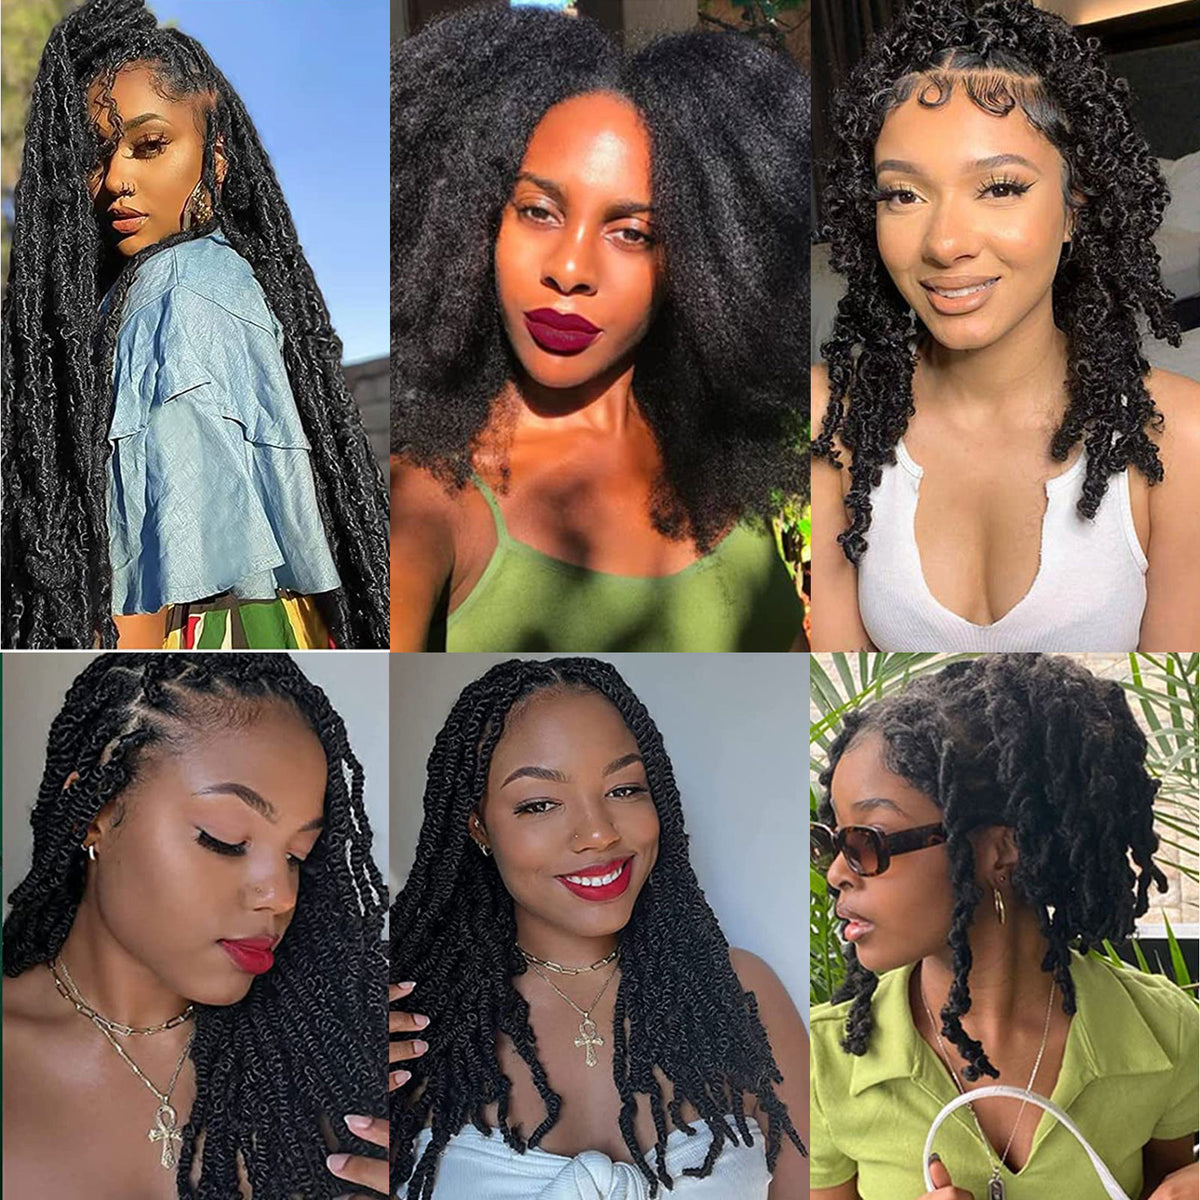 24 Inches Pack of 3 Marley Hair For Faux Locs Soft & Bouncy Cuban Twist Hair Synthetic Kanekalon Kinky Twist Hair For Braiding Crochet Marley Twist Braiding Hair For Black Woman 1B / Natural Black